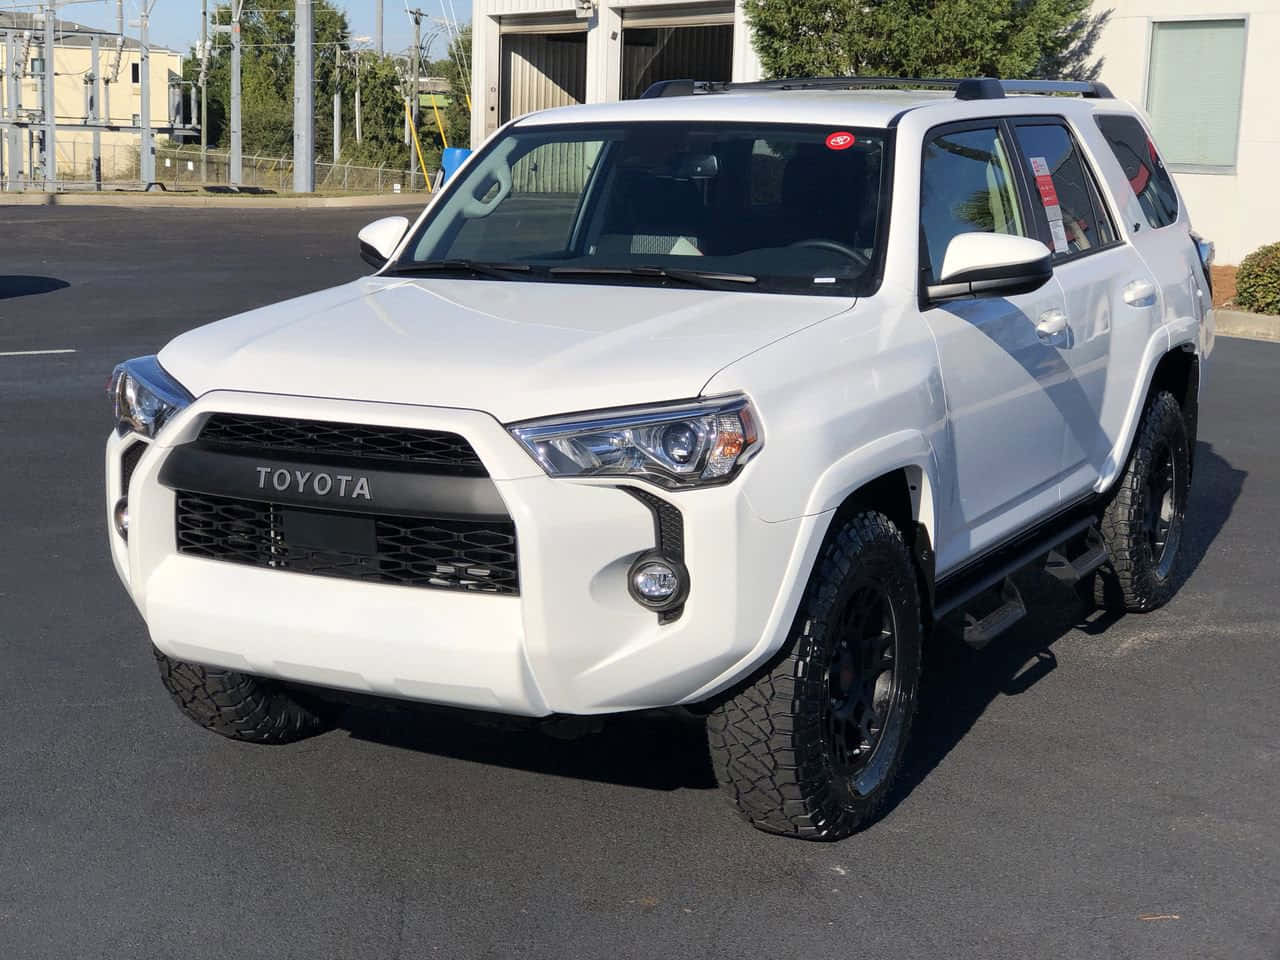 A White Toyota 4runner Is Parked In A Parking Lot